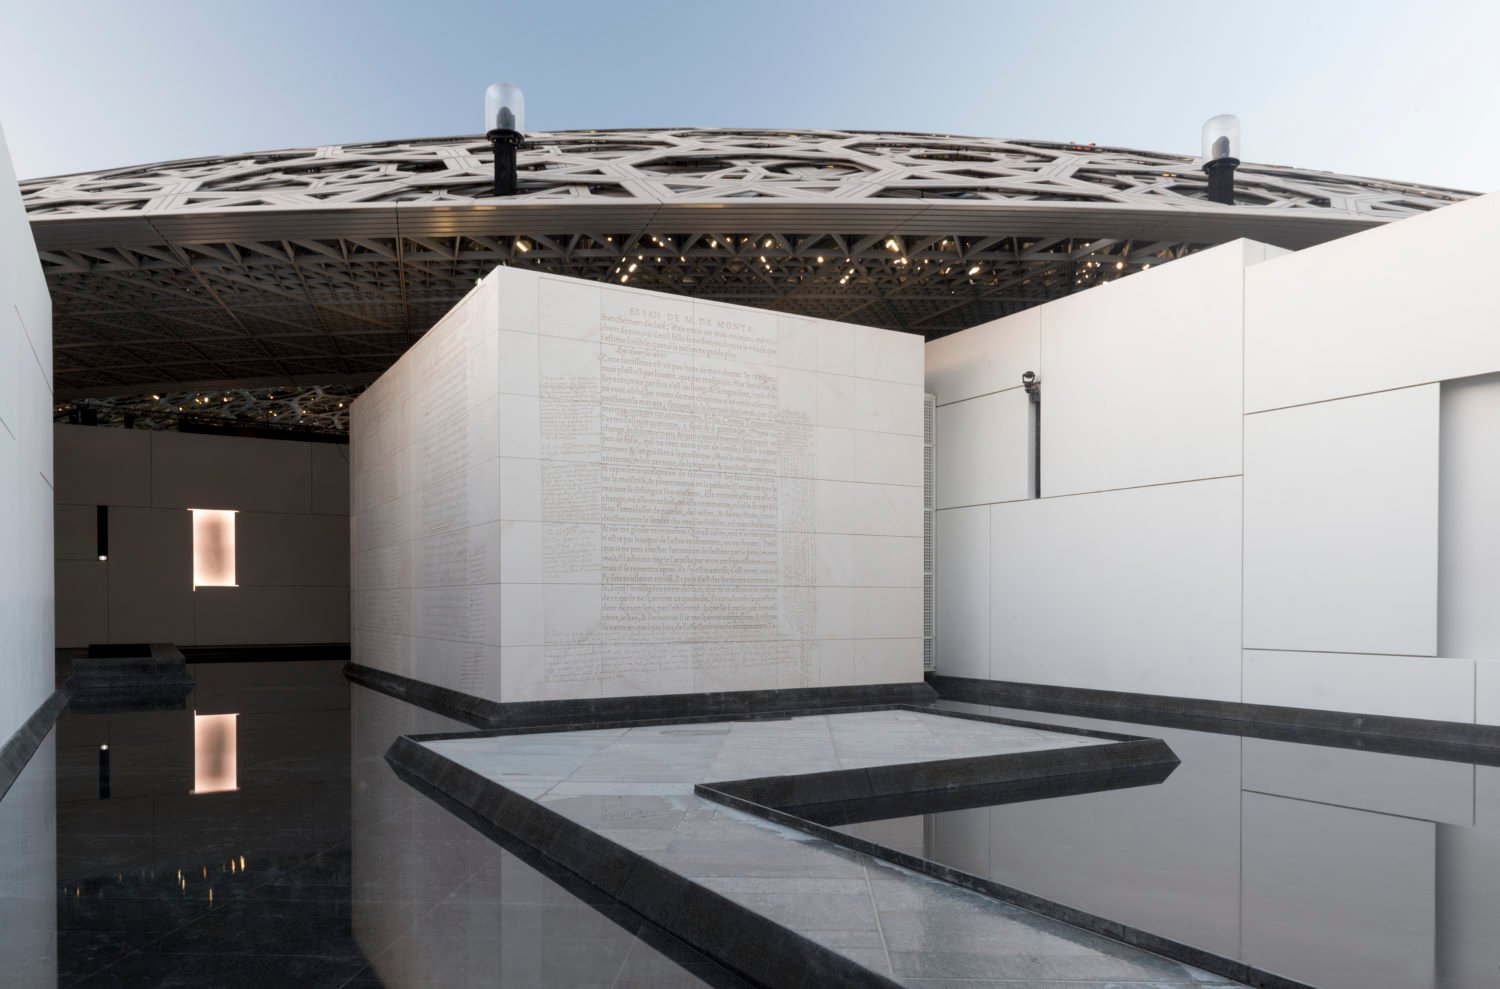 Fine boat Consistent The Louvre Abu Dhabi Puts a $1 Billion Spotlight on Globalization—But Makes  Some Glaring Historical Omissions